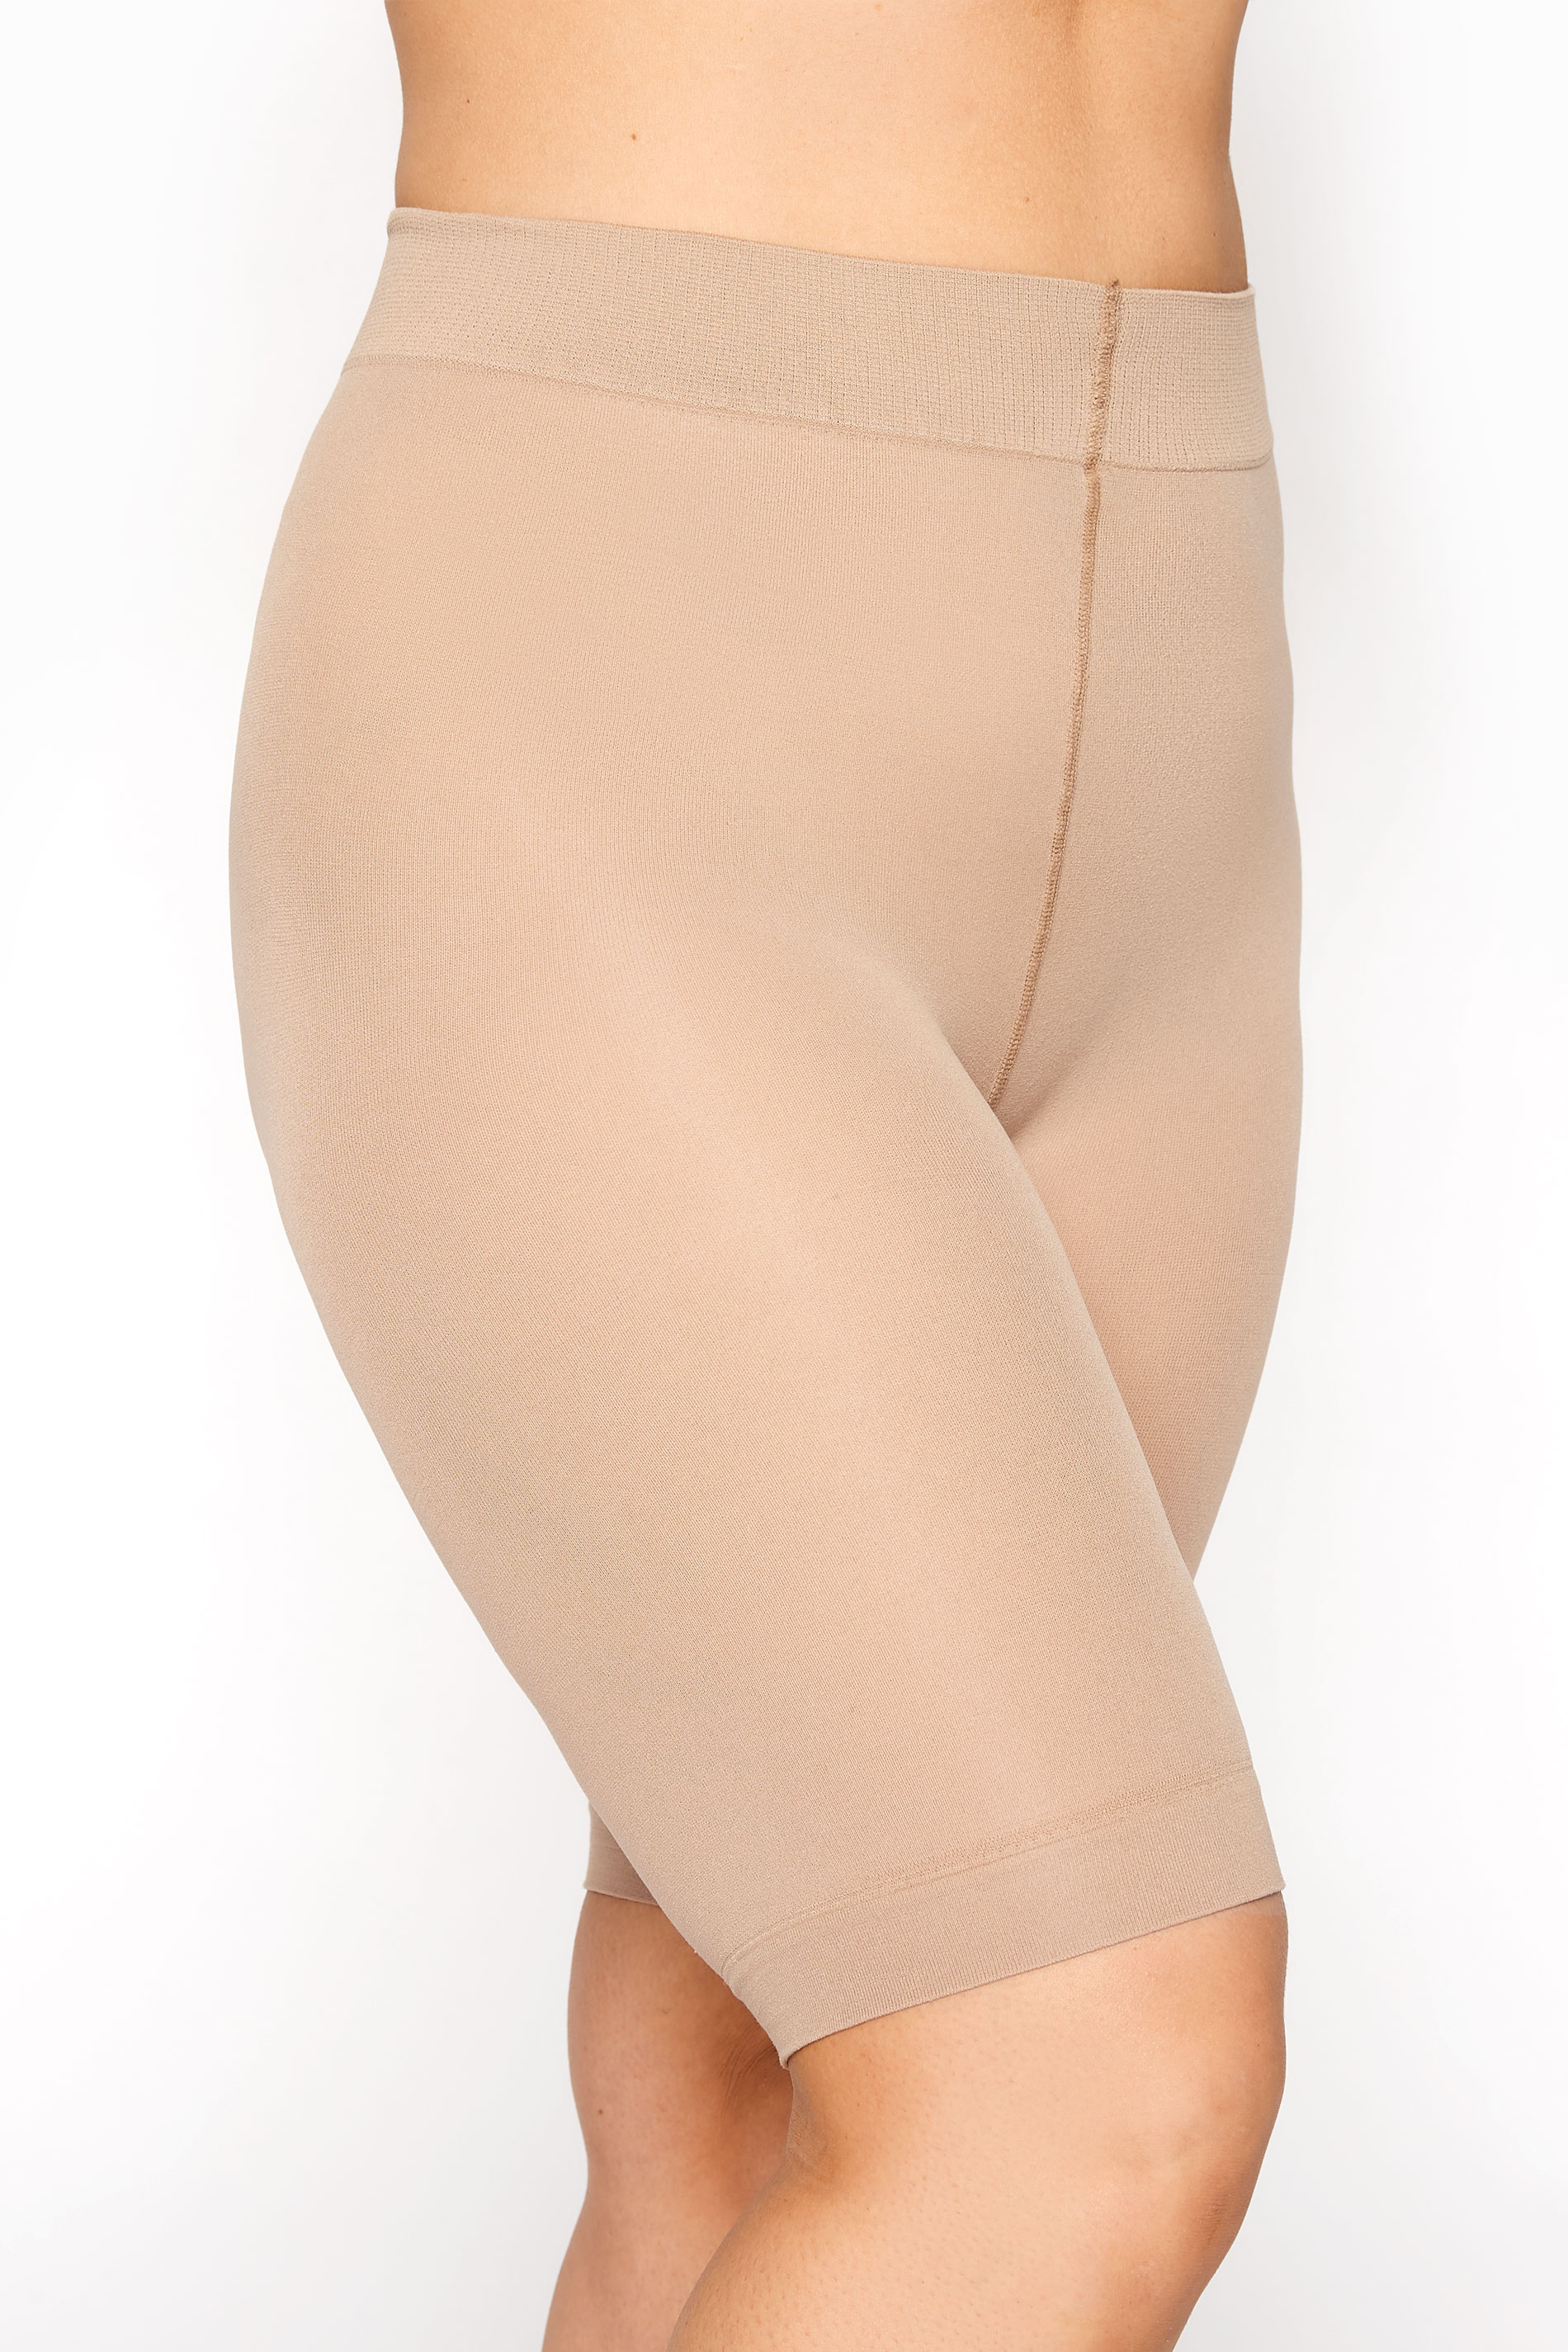 Nude Anti Chafing Shorts